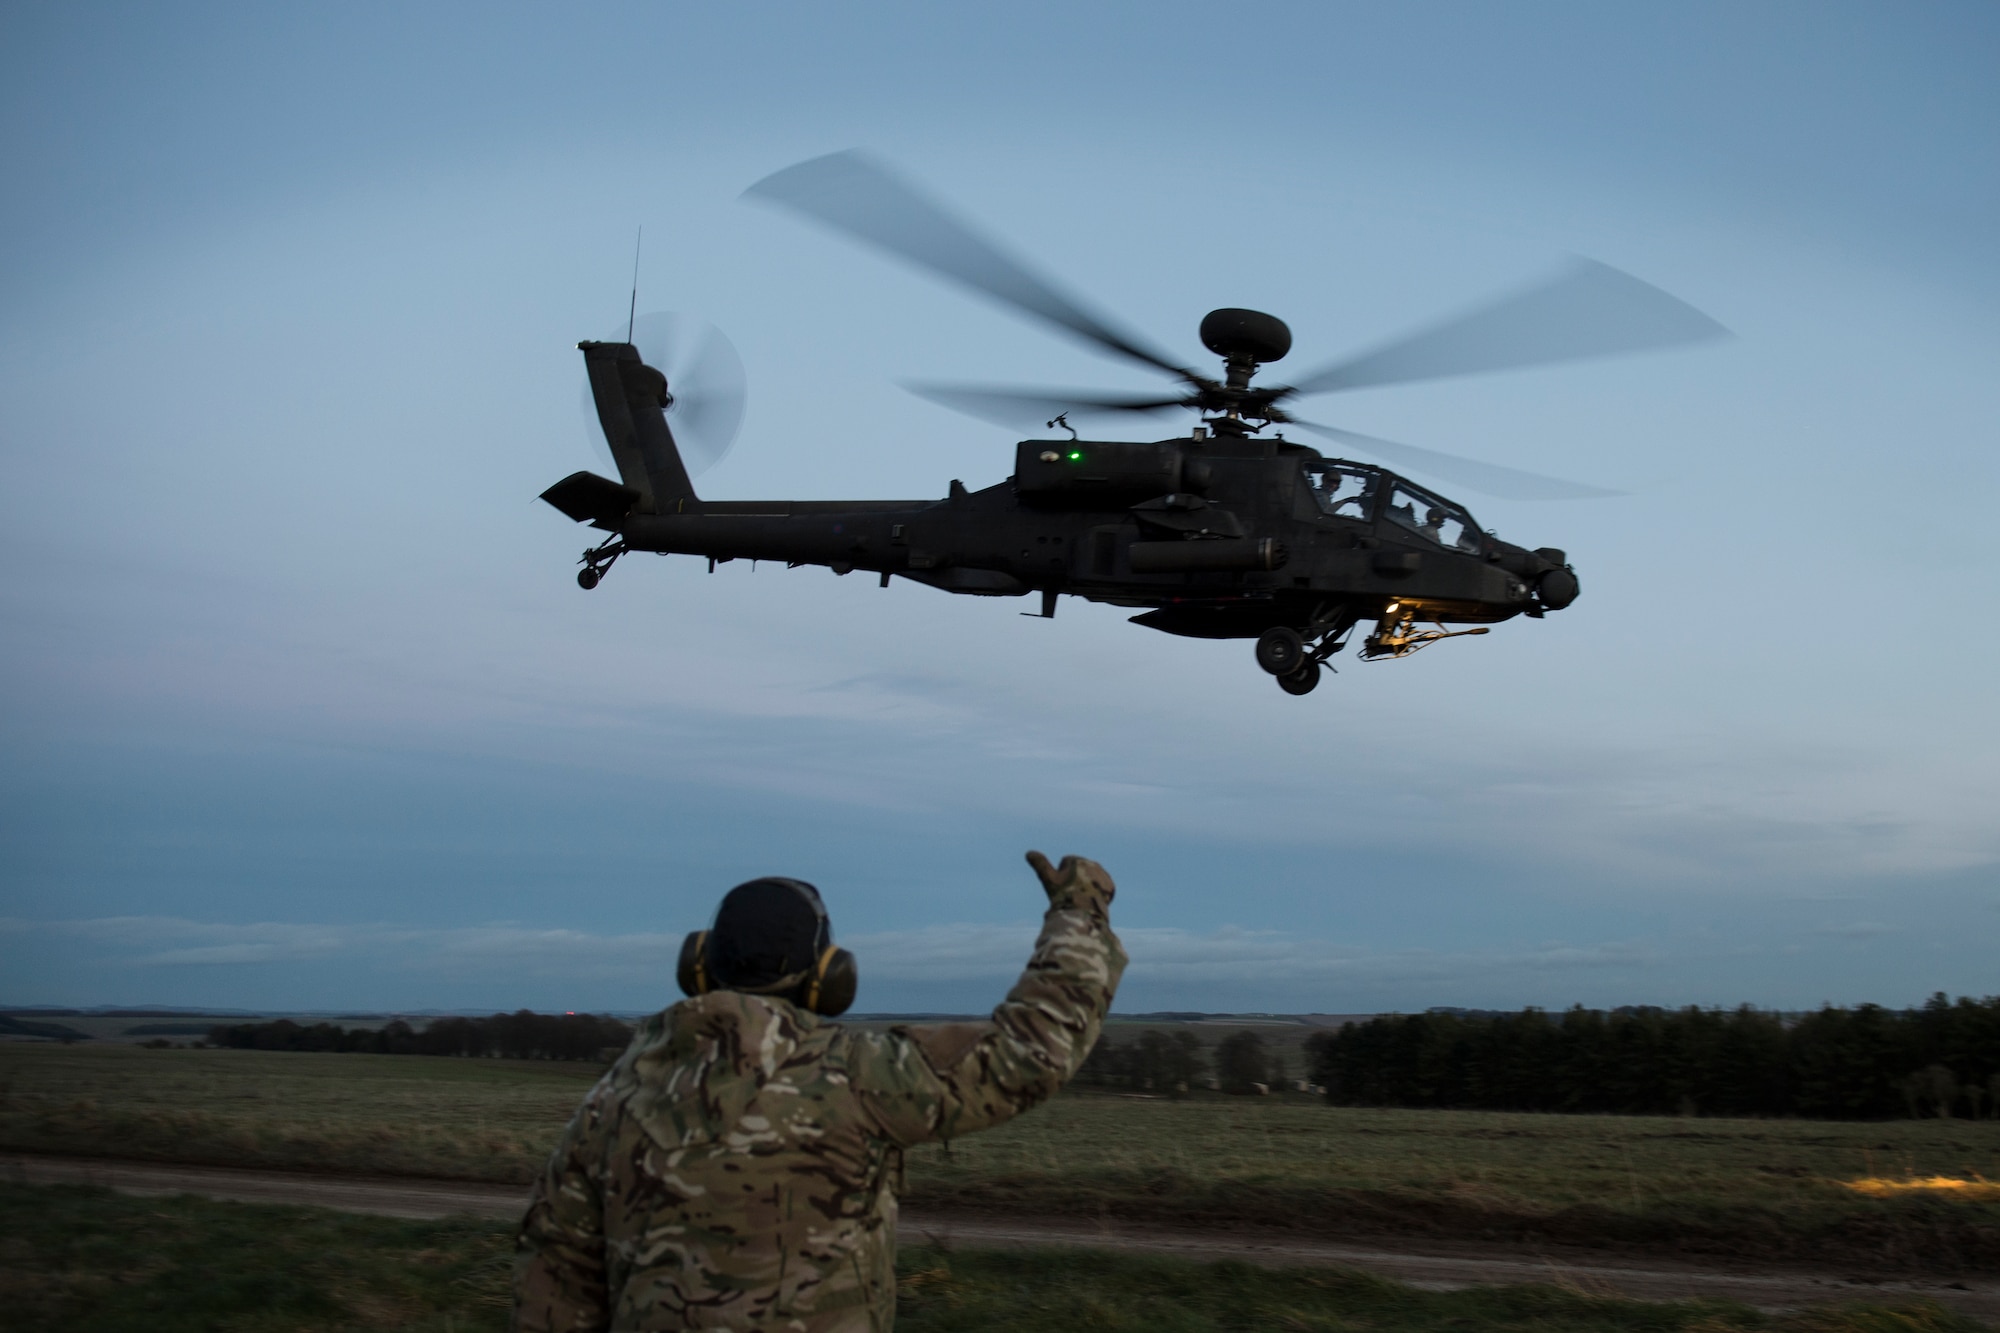 A British Army AH-64 Apache from 663 Squadron, 3 Regiment Army Air Corps, takes off during exercise Voijek Valour from Salisbury Plain, England, March 2, 2016. The exercise included six helicopters, 250 British soldiers and more than a dozen jets conducting scenarios across Salisbury Plain. (U.S. Air Force photo/Airman 1st Class Erin R. Babis)